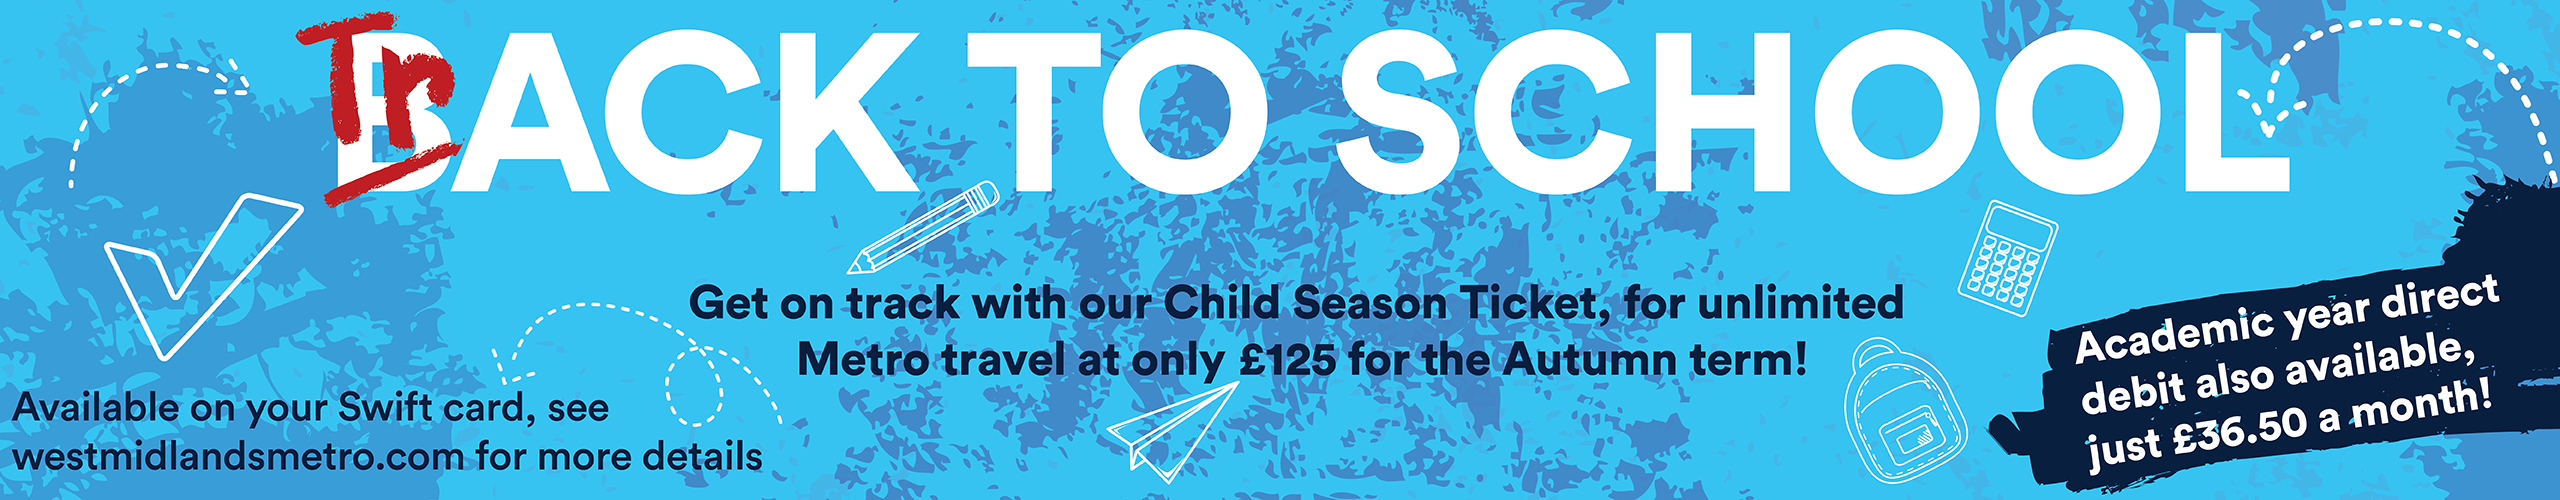 Back to school - Get on track with our child season ticket, for unlimited Metro travel at only £125 for the Autumn Term - Academic year direct debit also available, just £36.50 a month!